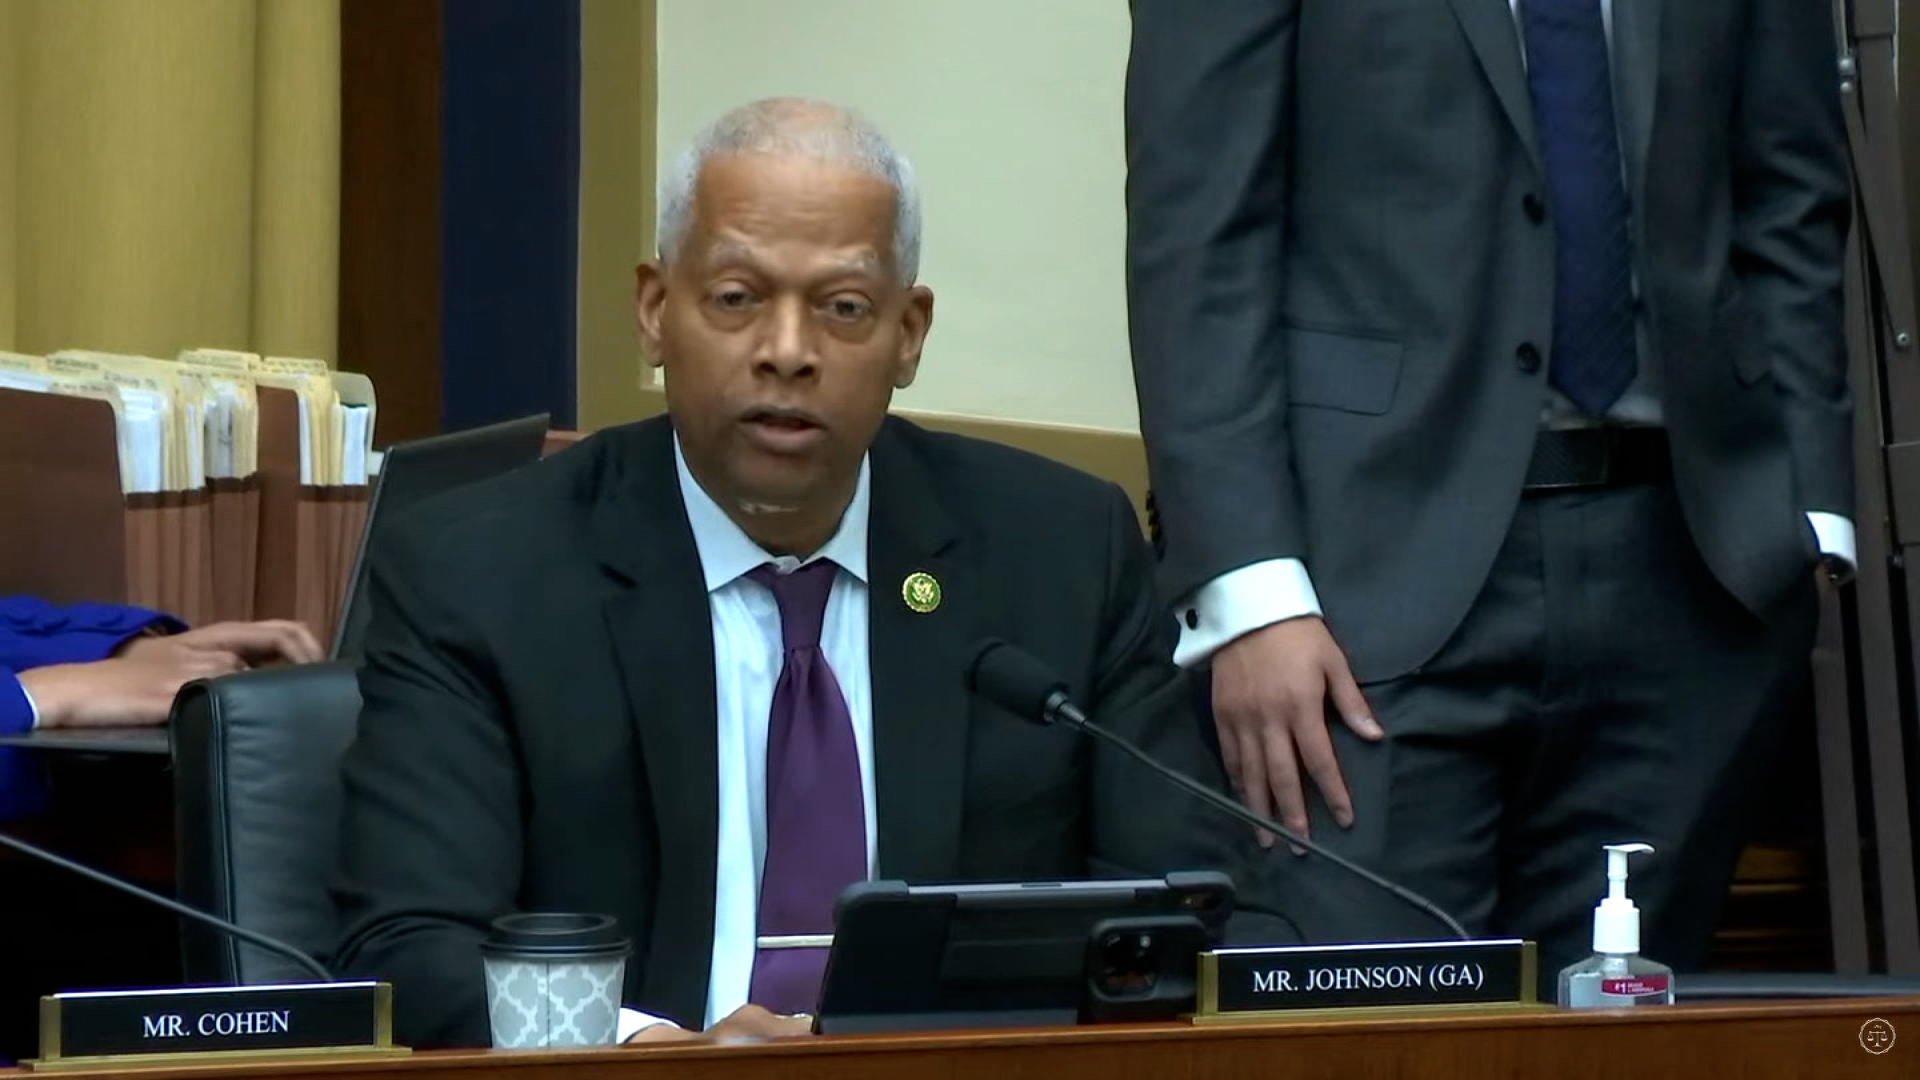 Rep. Hank Johnson speaks during the hearing on Tuesday.